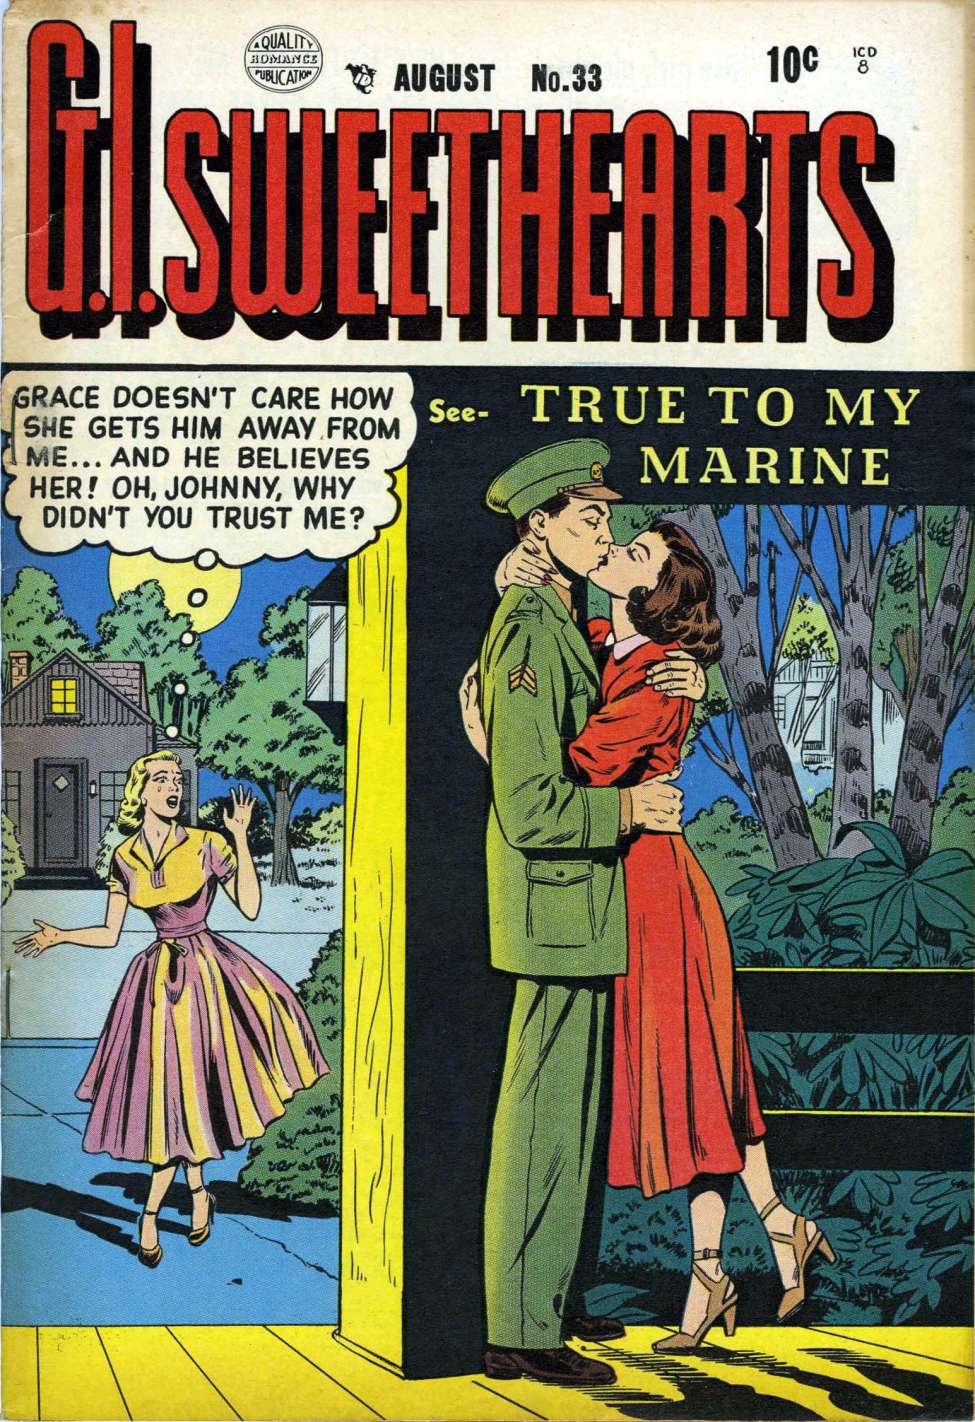 Book Cover For G.I. Sweethearts 33